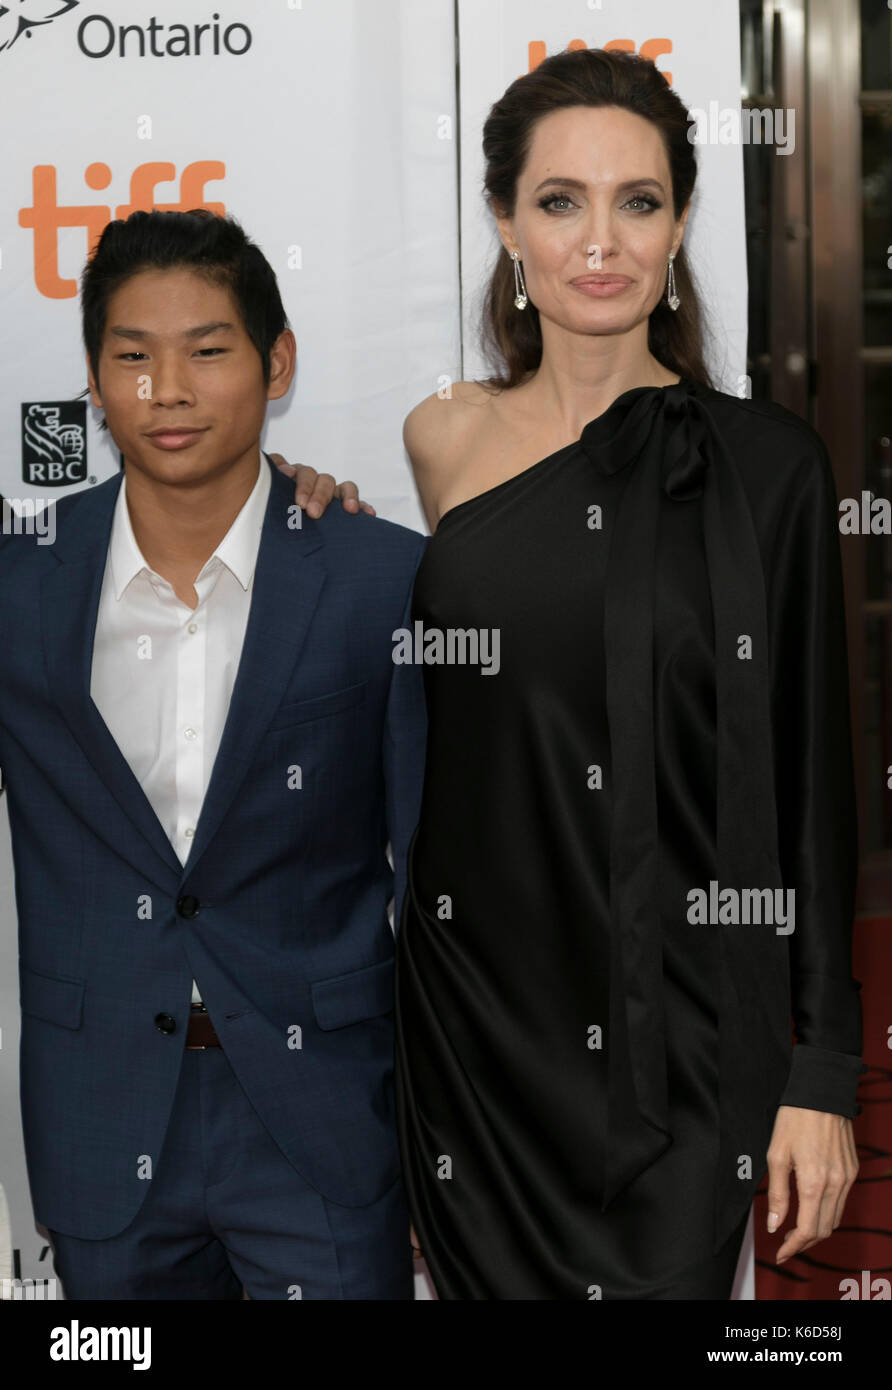 Toronto, Canada. 11th Sep, 2017. Pax Thien Jolie-Pitt (l) and Angelina Jolie attend the premiere of 'First They Killed My Father' during the 42nd Toronto International Film Festival, tiff, at Princess of Wales Theatre in Toronto, Canada, on 11 September 2017. · NO WIRE SERVICE · Photo: Hubert Boesl/dpa/Alamy Live News Stock Photo